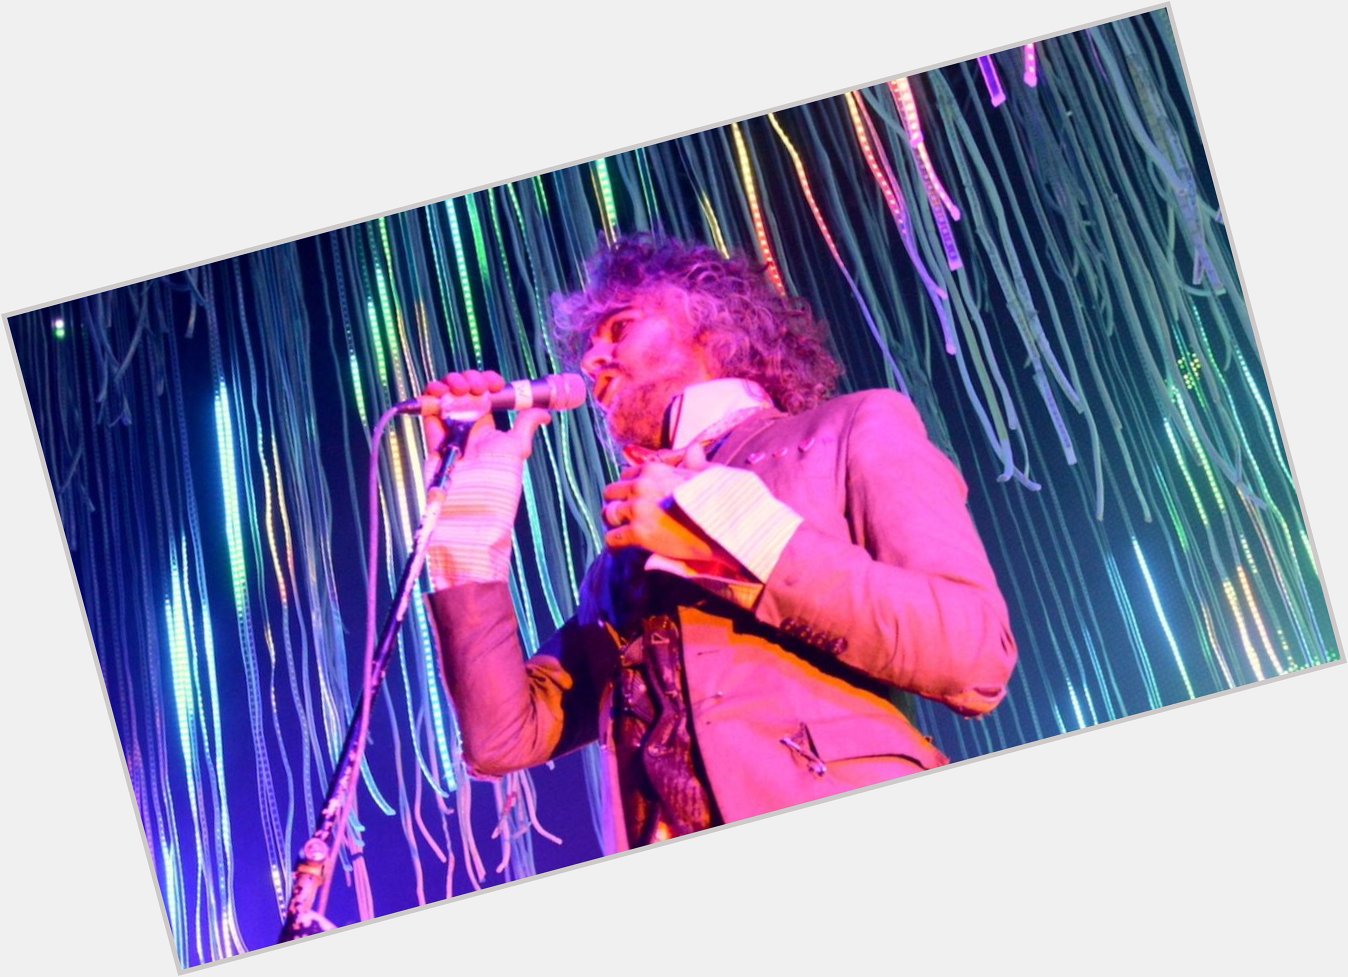 Happy Birthday Wayne Coyne: The Flaming Lips Perform For Austin City Limits In 2004  